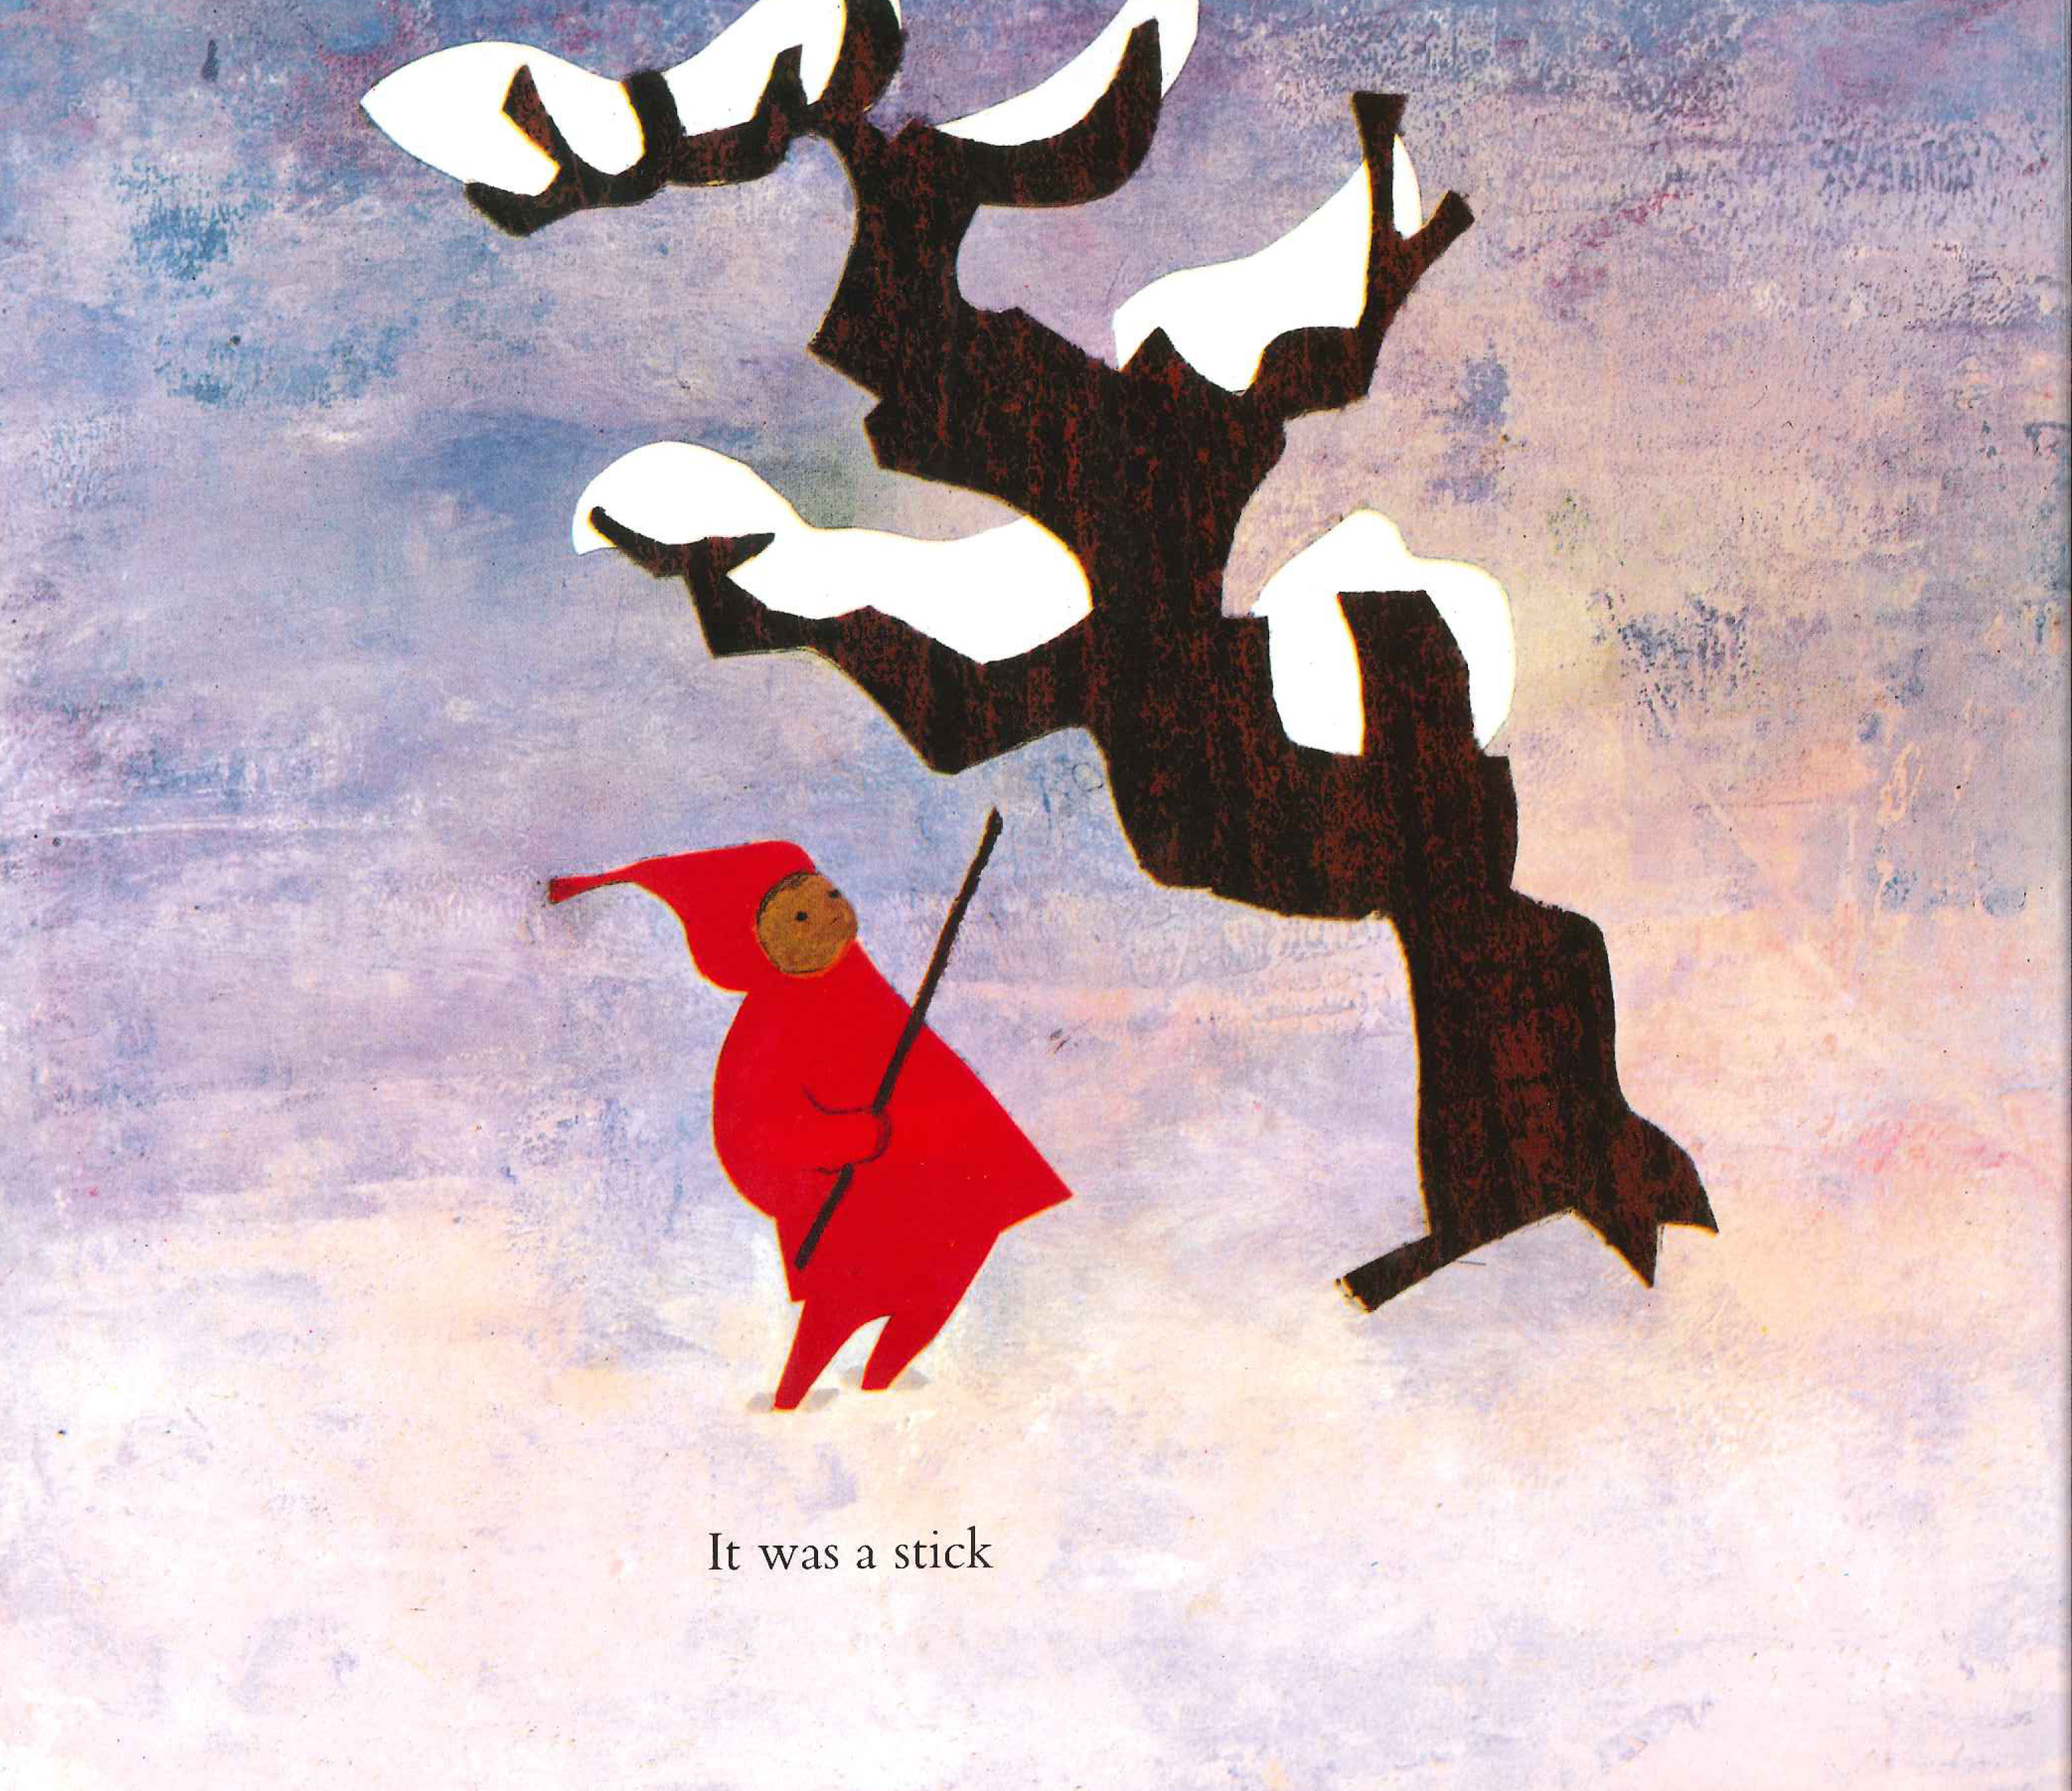 Example In The Original Edition Of The Snowy Day Peter Finds A Stick